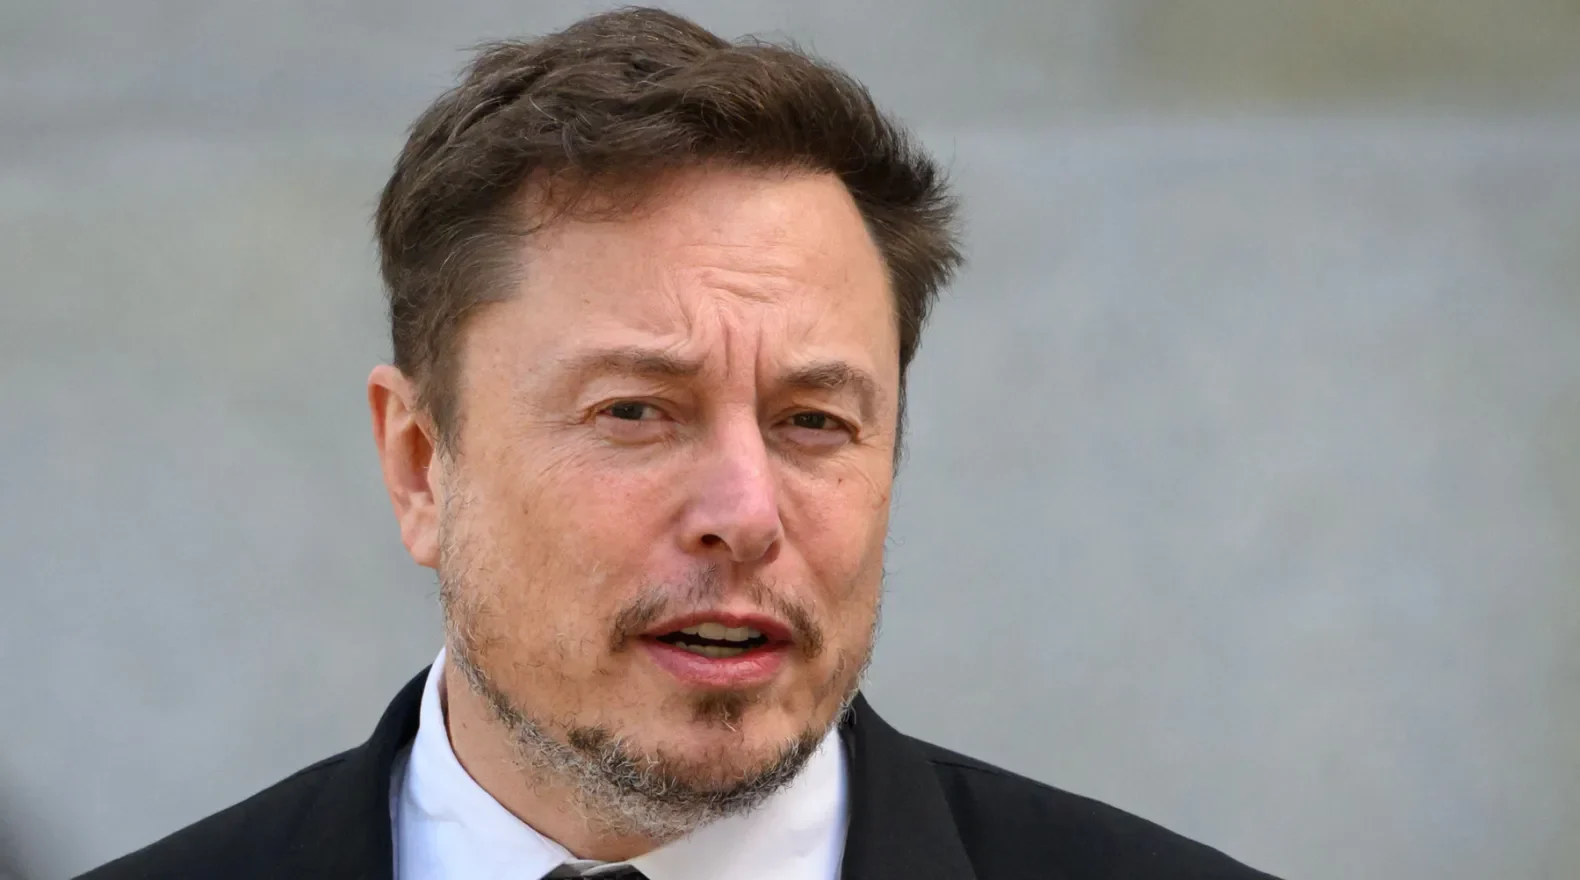 Musk’s social media spread fakes about attack on Israel